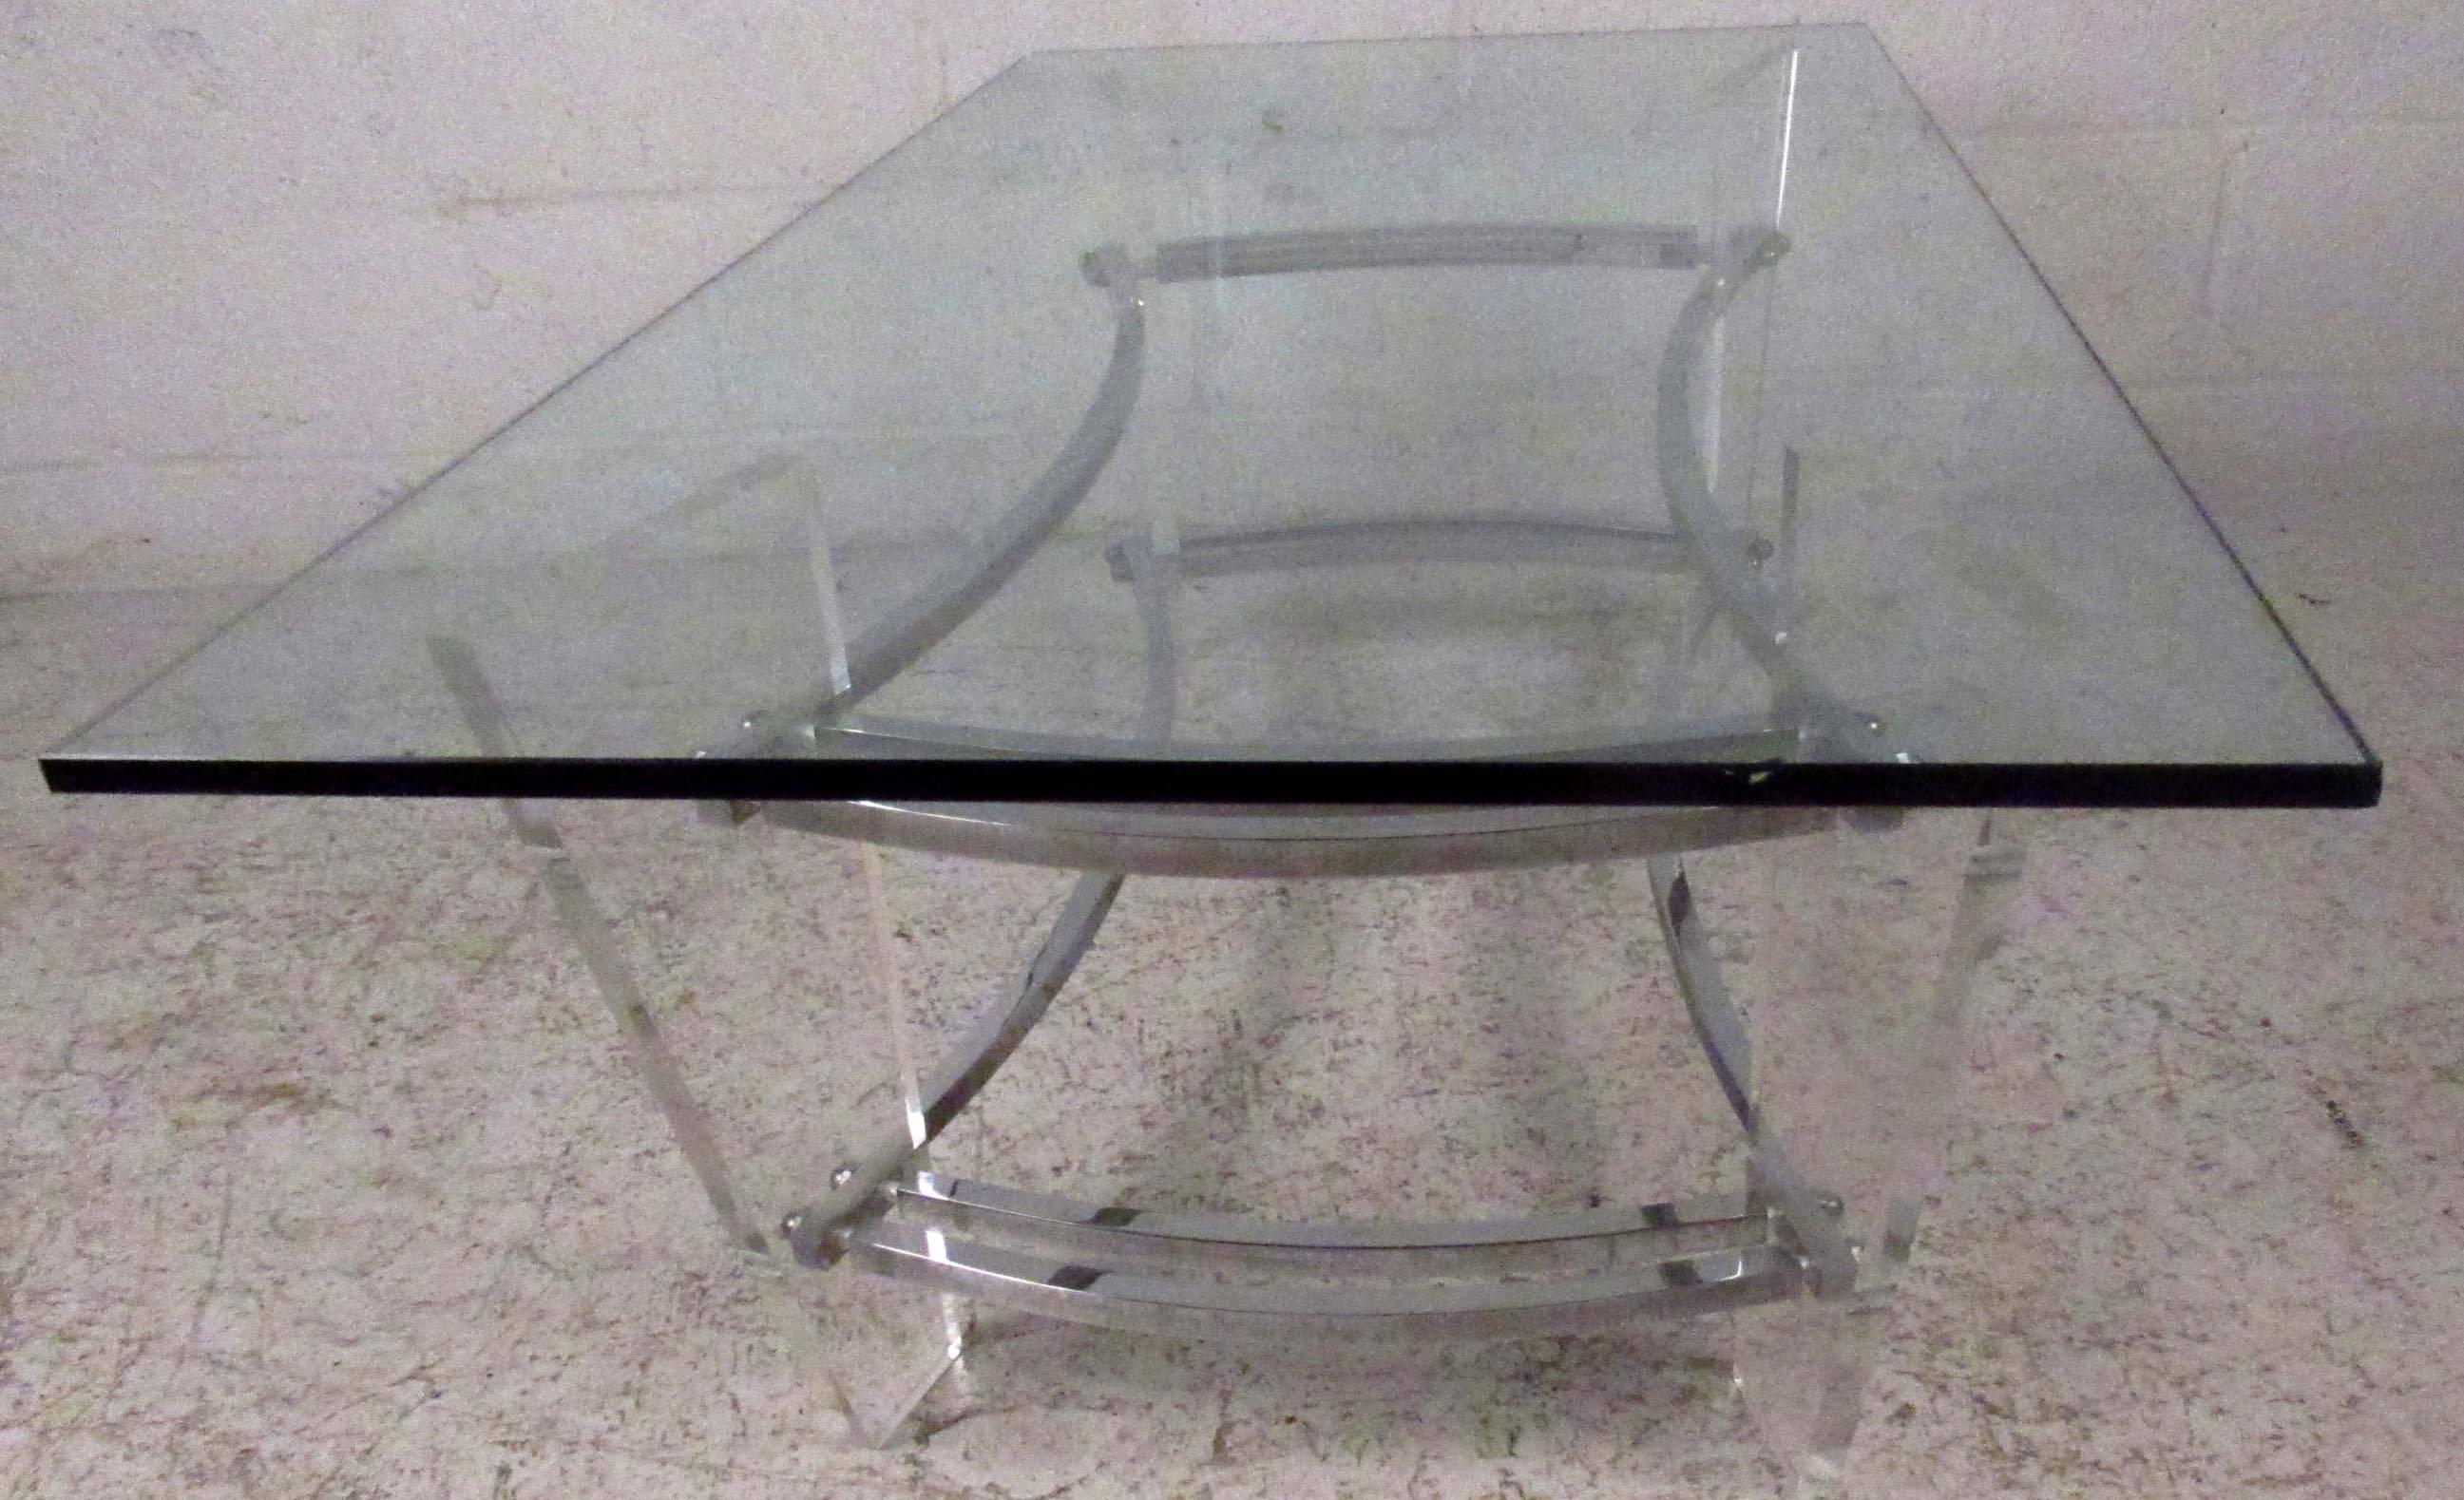 Vintage-modern cocktail table featuring beautifully designed Lucite and chrome base and glass top, designed after Charles Hollis Jones. Stunning mid-century lucite coffee table for home or business seating arrangement.

Please confirm item location